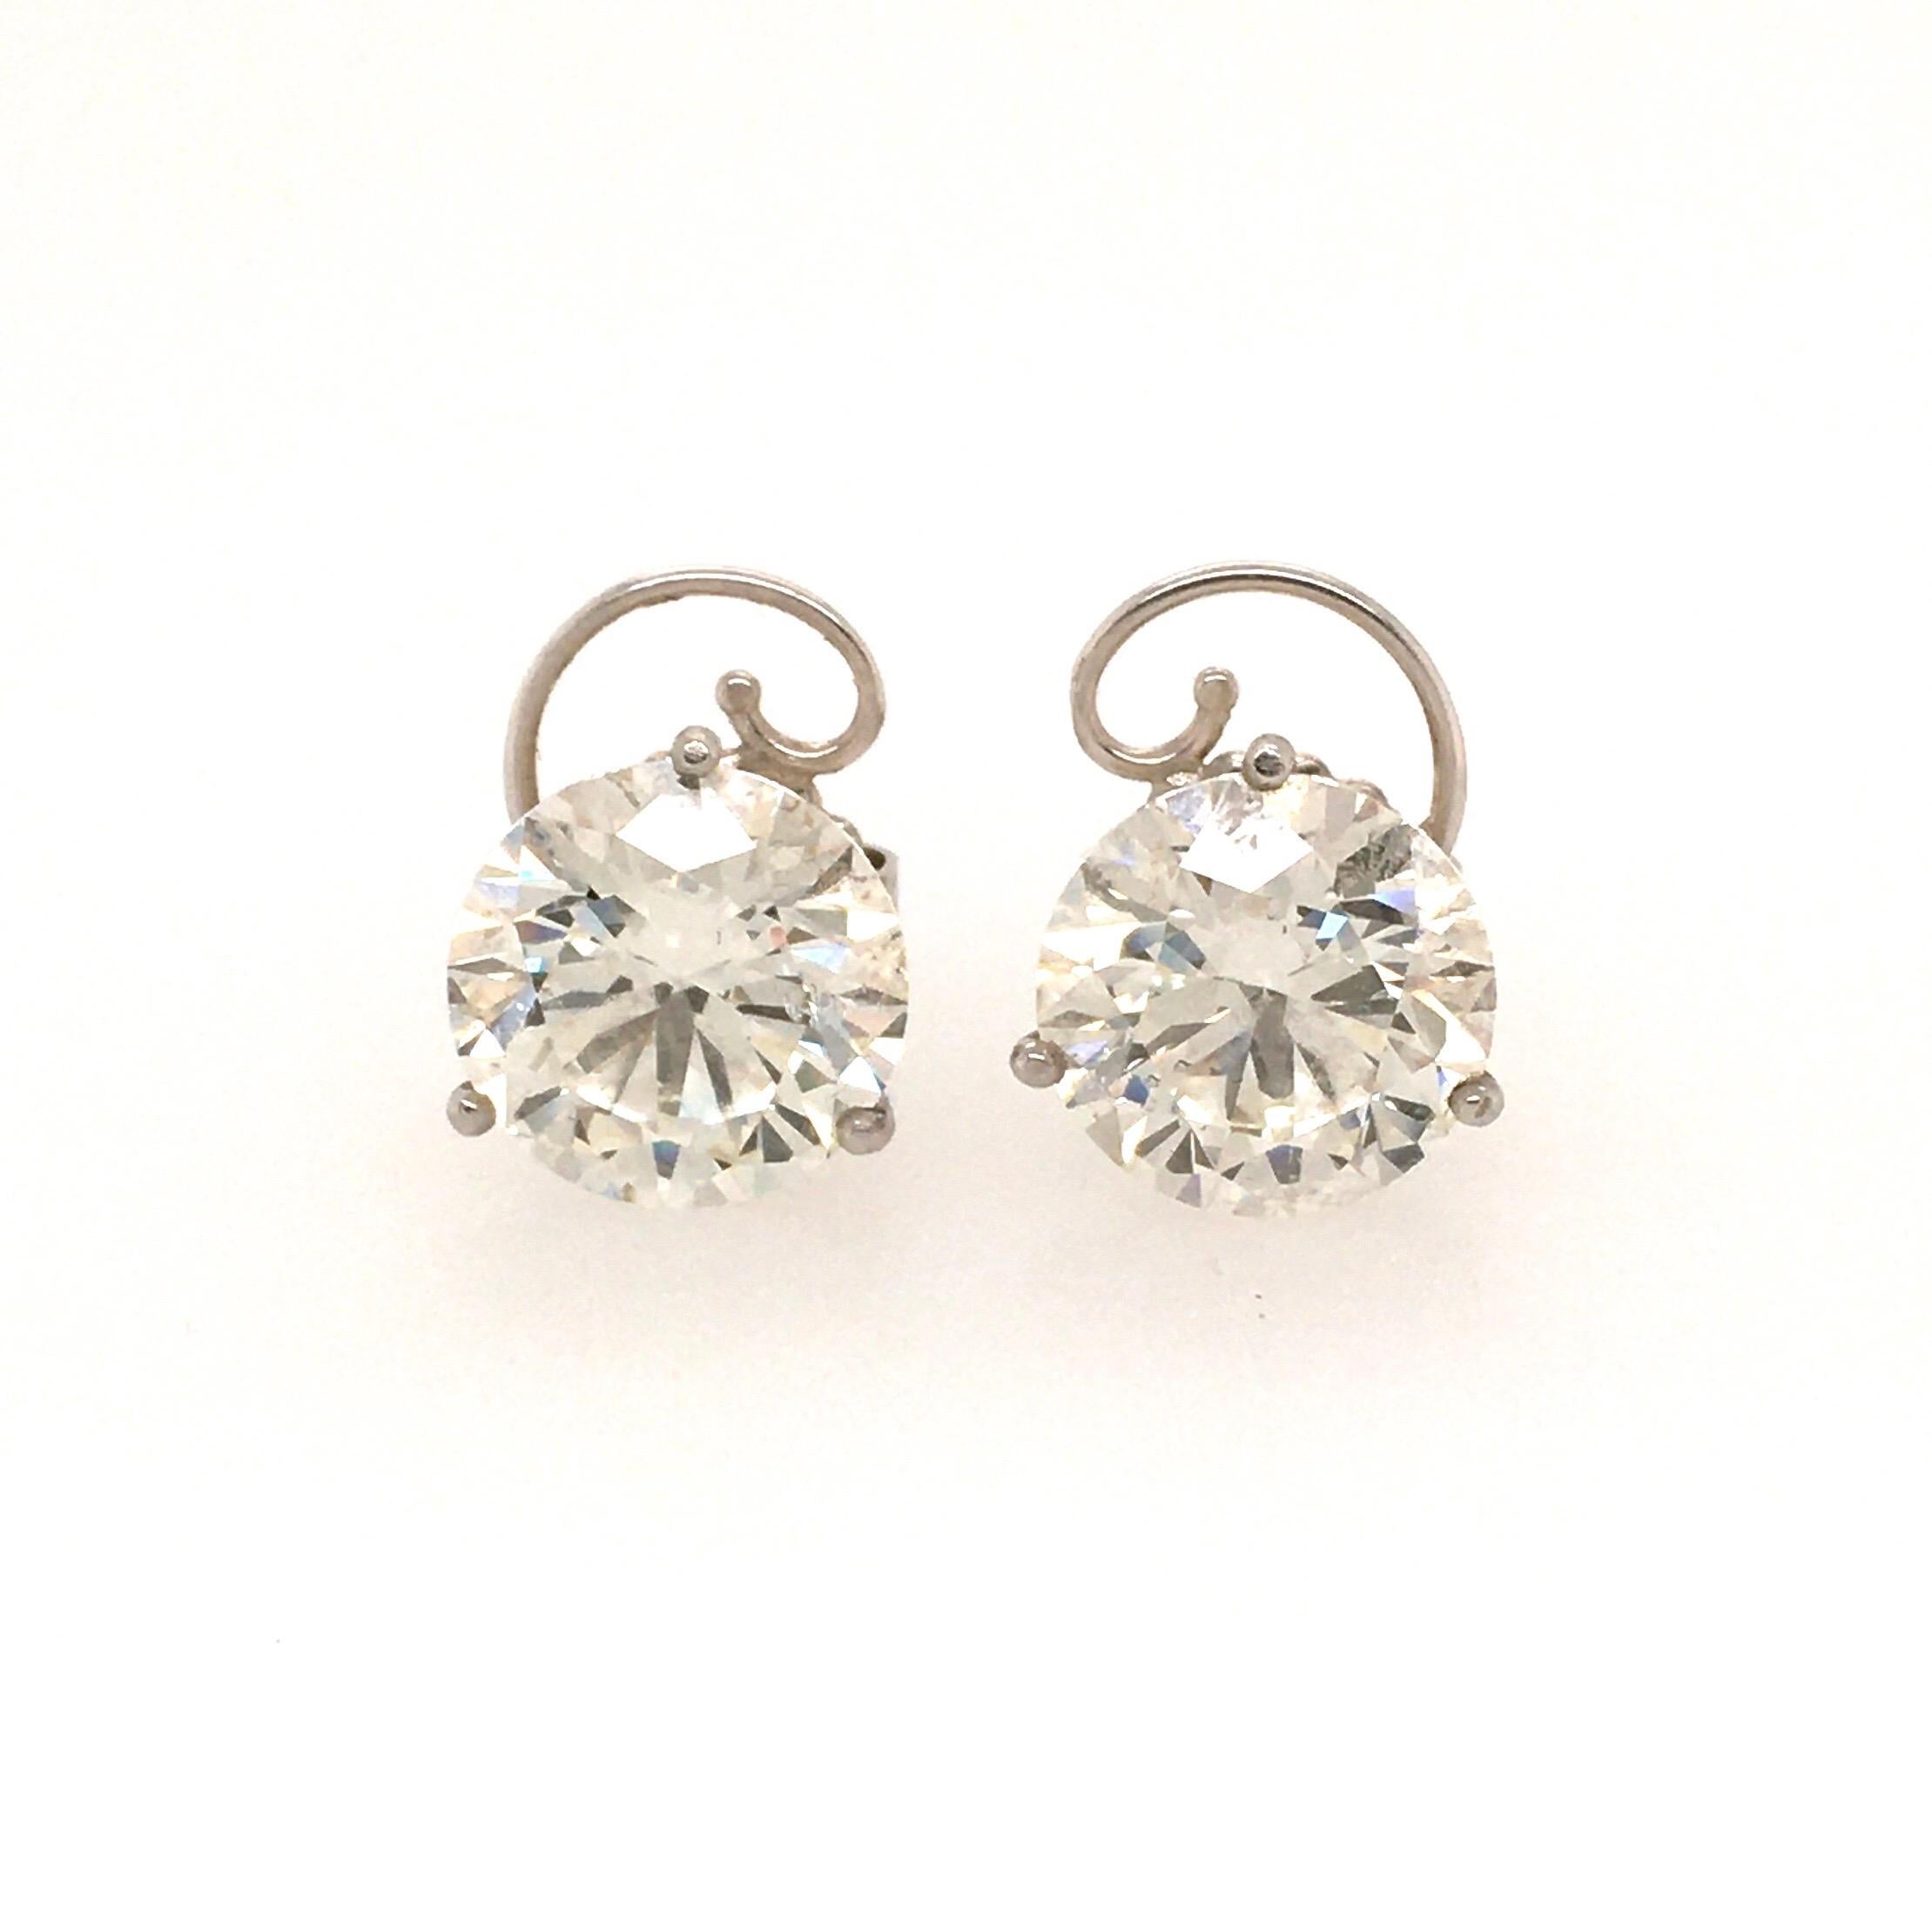 A pair of platinum and diamond ear studs, weighing 6.02 carats and 6.03 carats, J SI2. In a martini setting. Gross weight is approximately 5.4 grams.

GIA issued a Diamond Grading Report for each diamond.  
Report 1258703365, dated June 28, 2019,